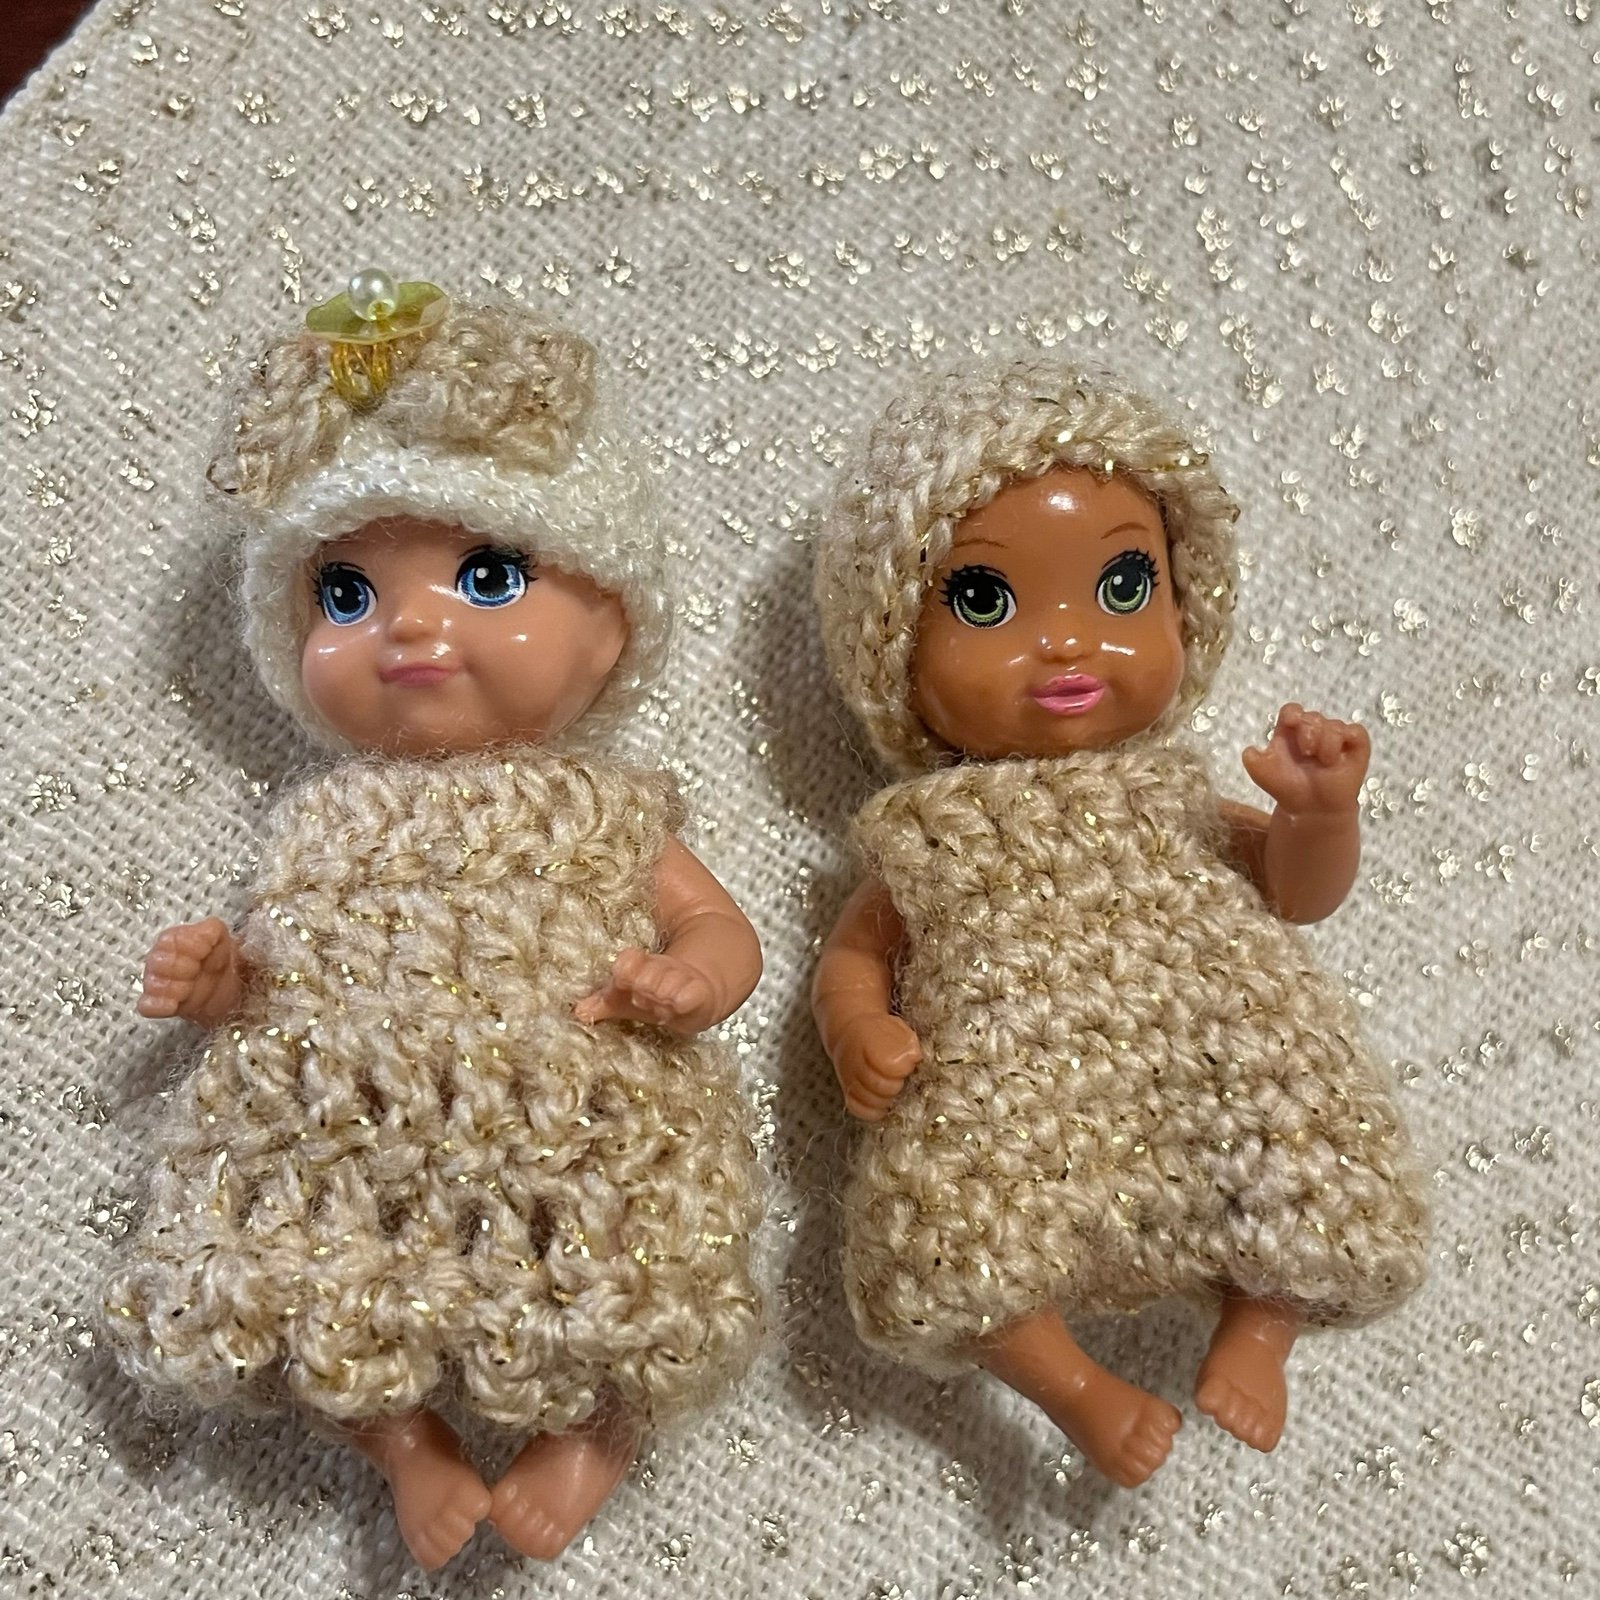 Handmade Clothes For Barbie baby rFob0Qhqj